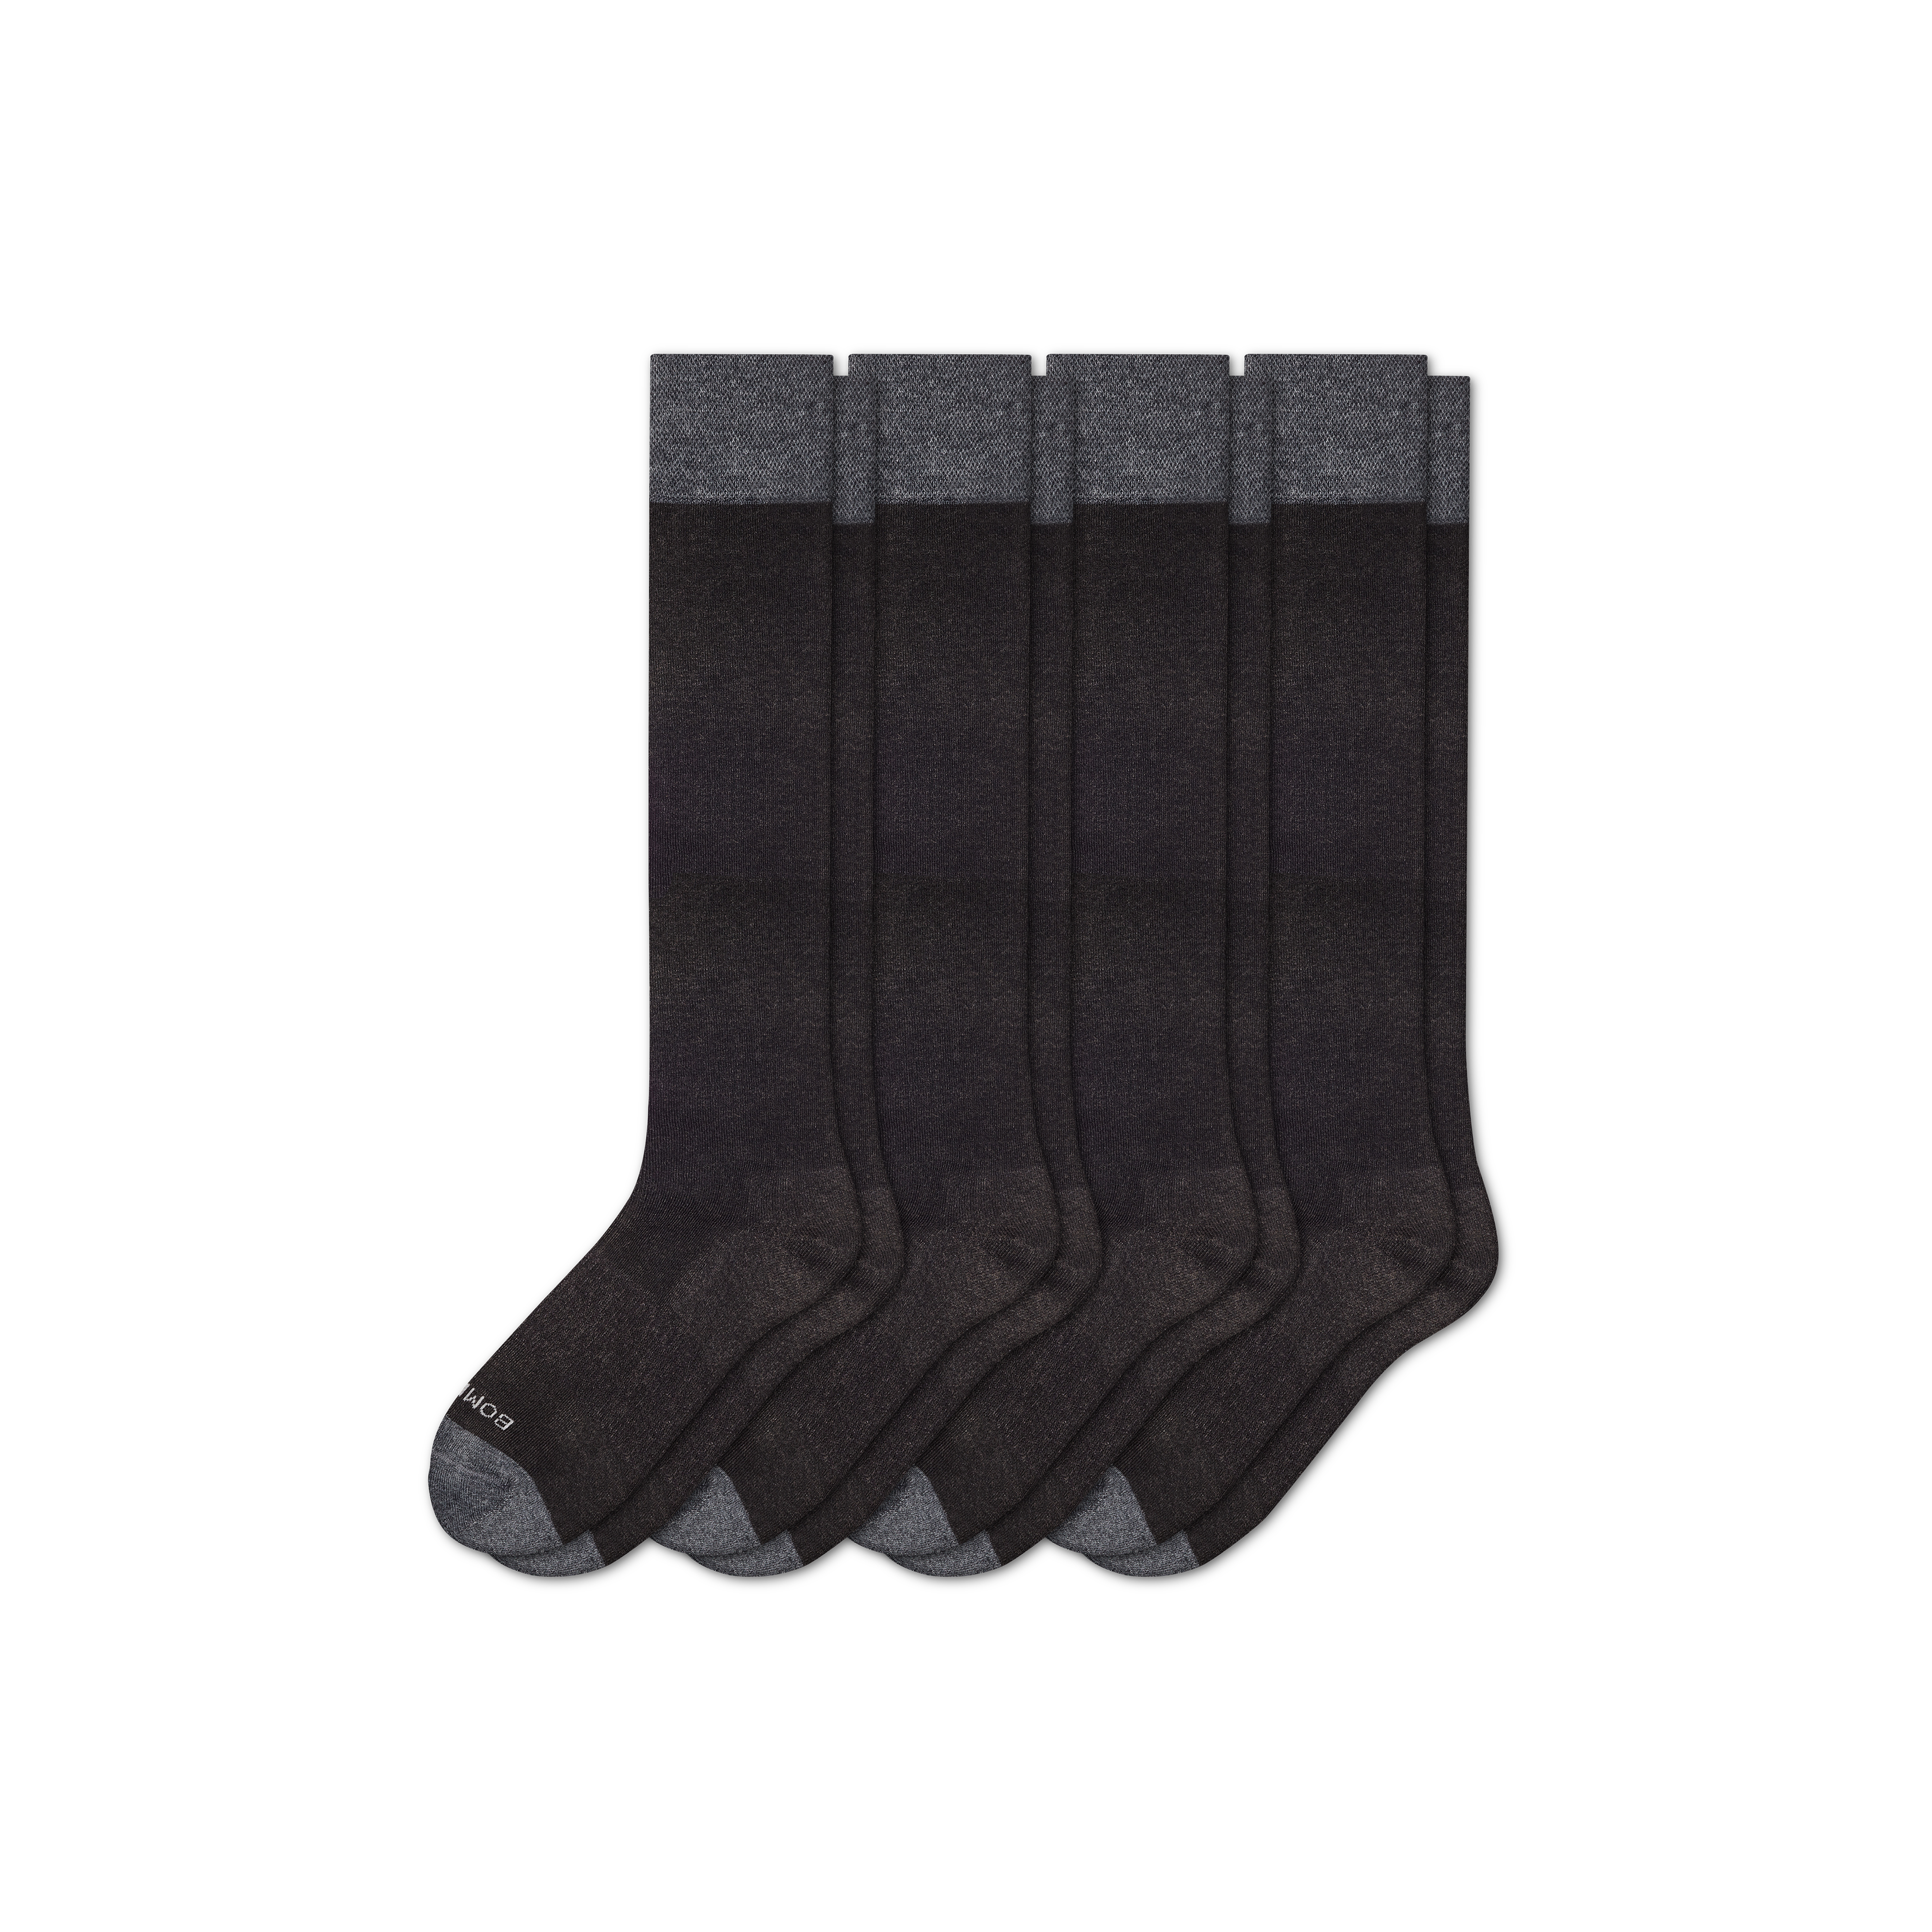 Bombas Dress Knee High Sock 4-pack In Charcoal